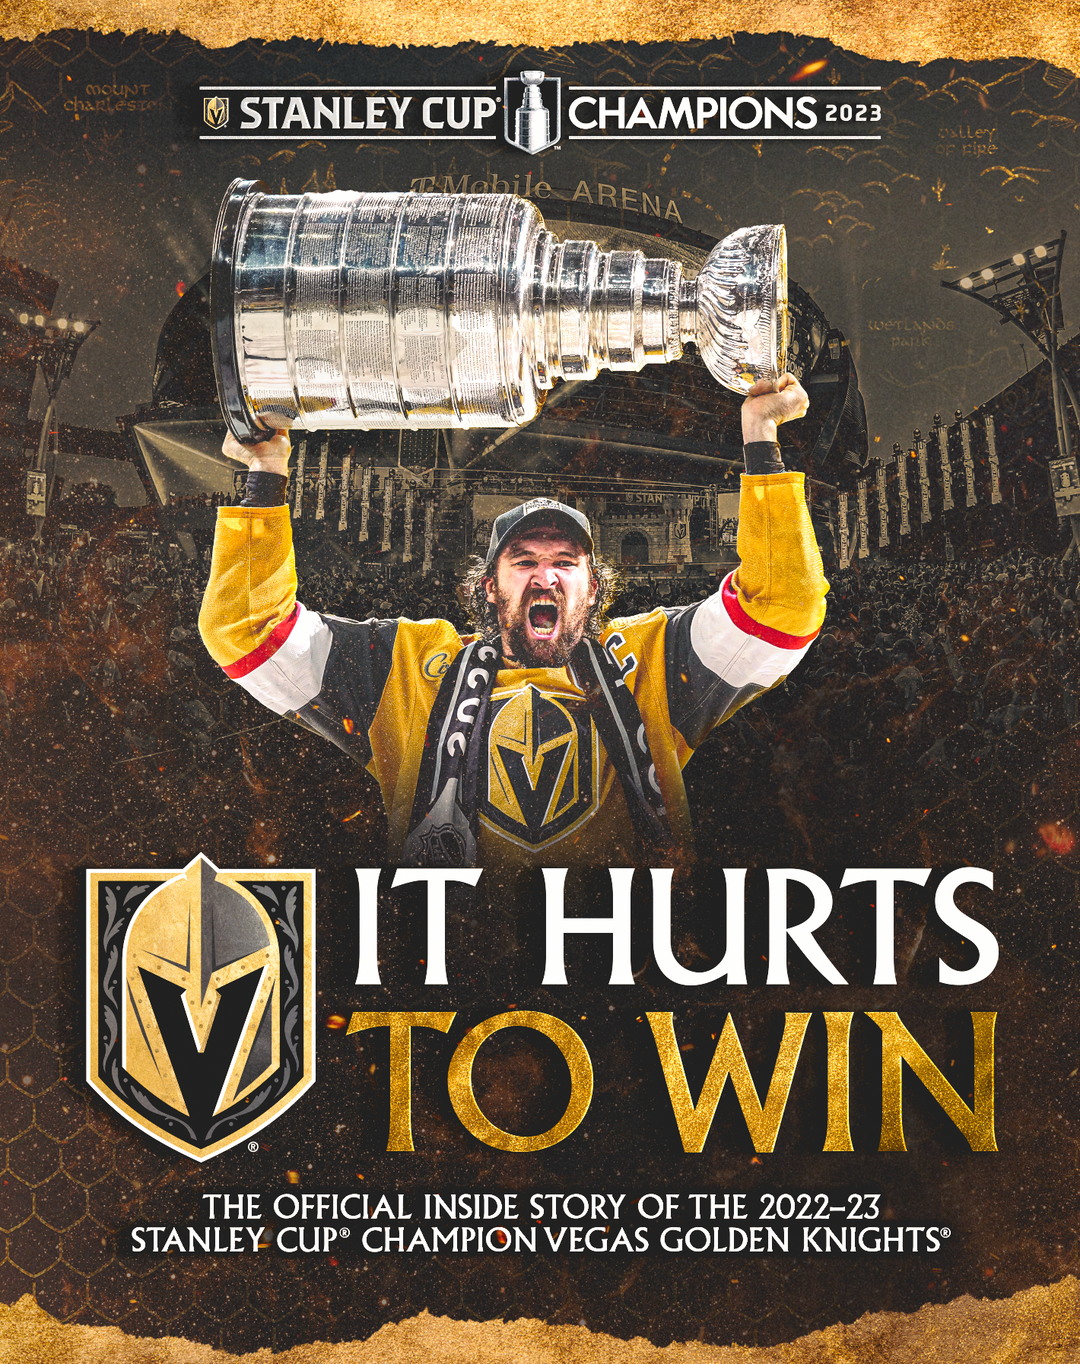 Vegas Golden Knights 2023 Stanley Cup Champions Book: "It Hurts to Win"